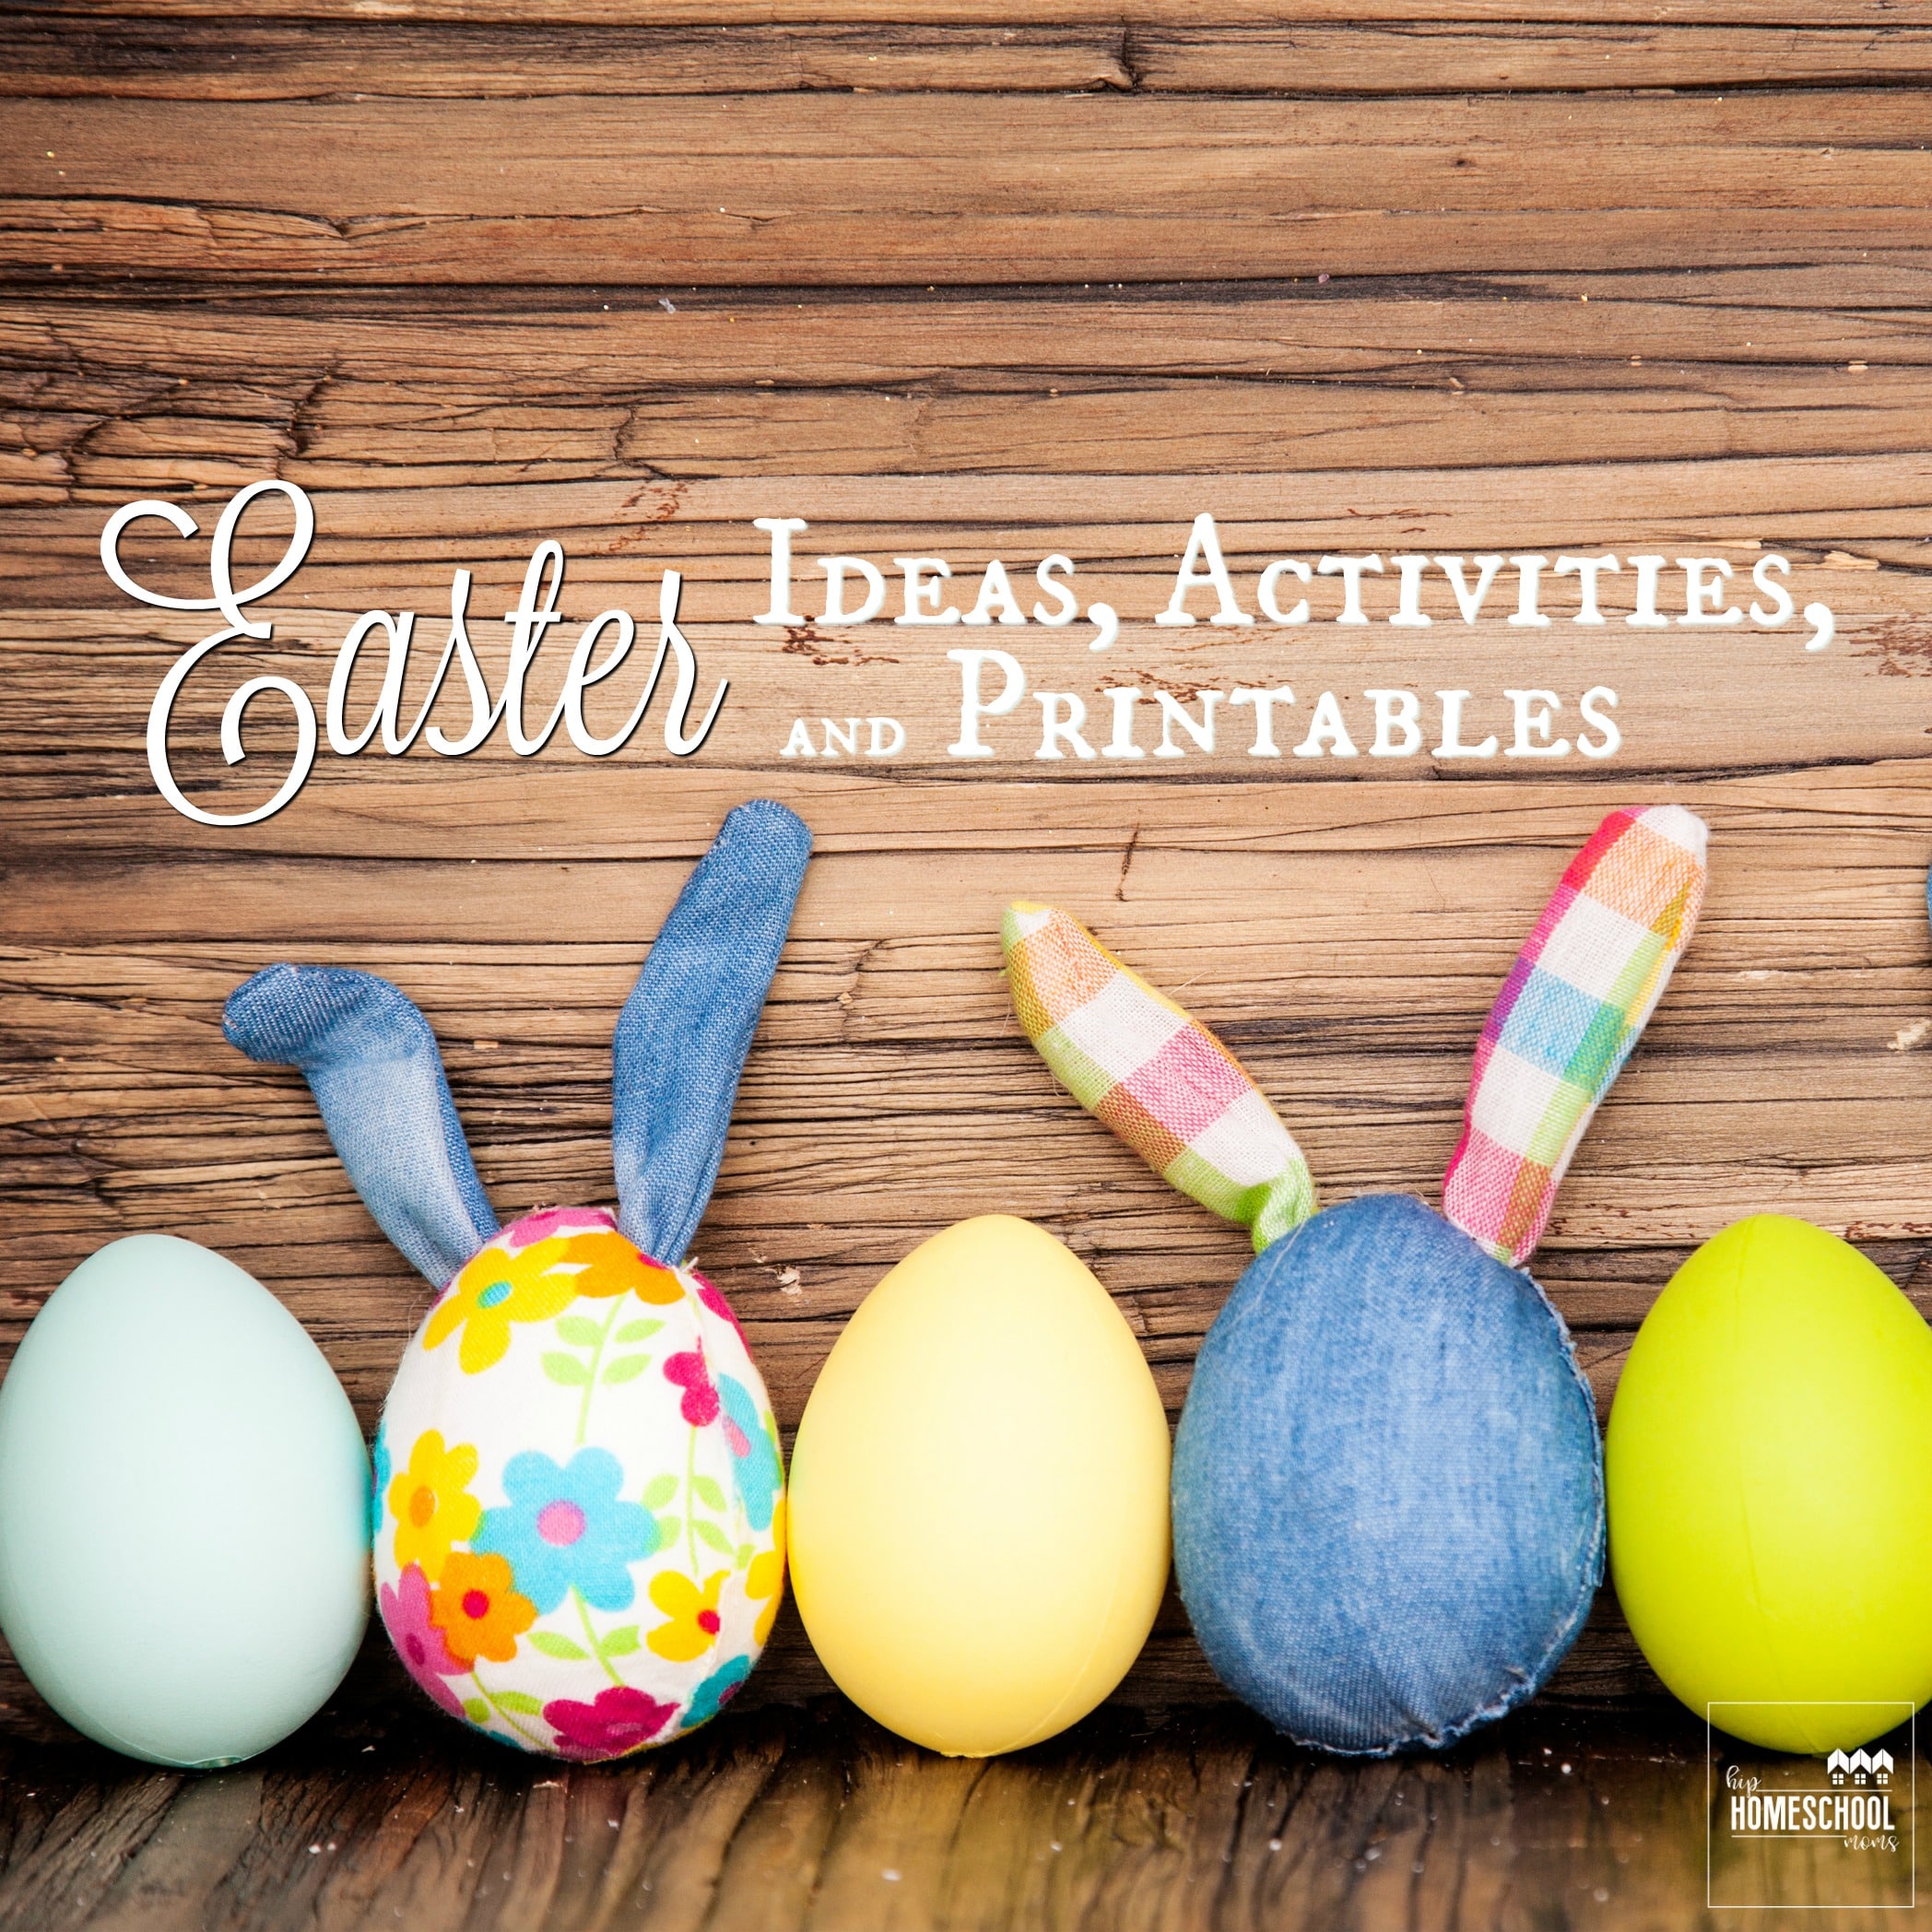 Easter Ideas, Activities, and Printables for Kids